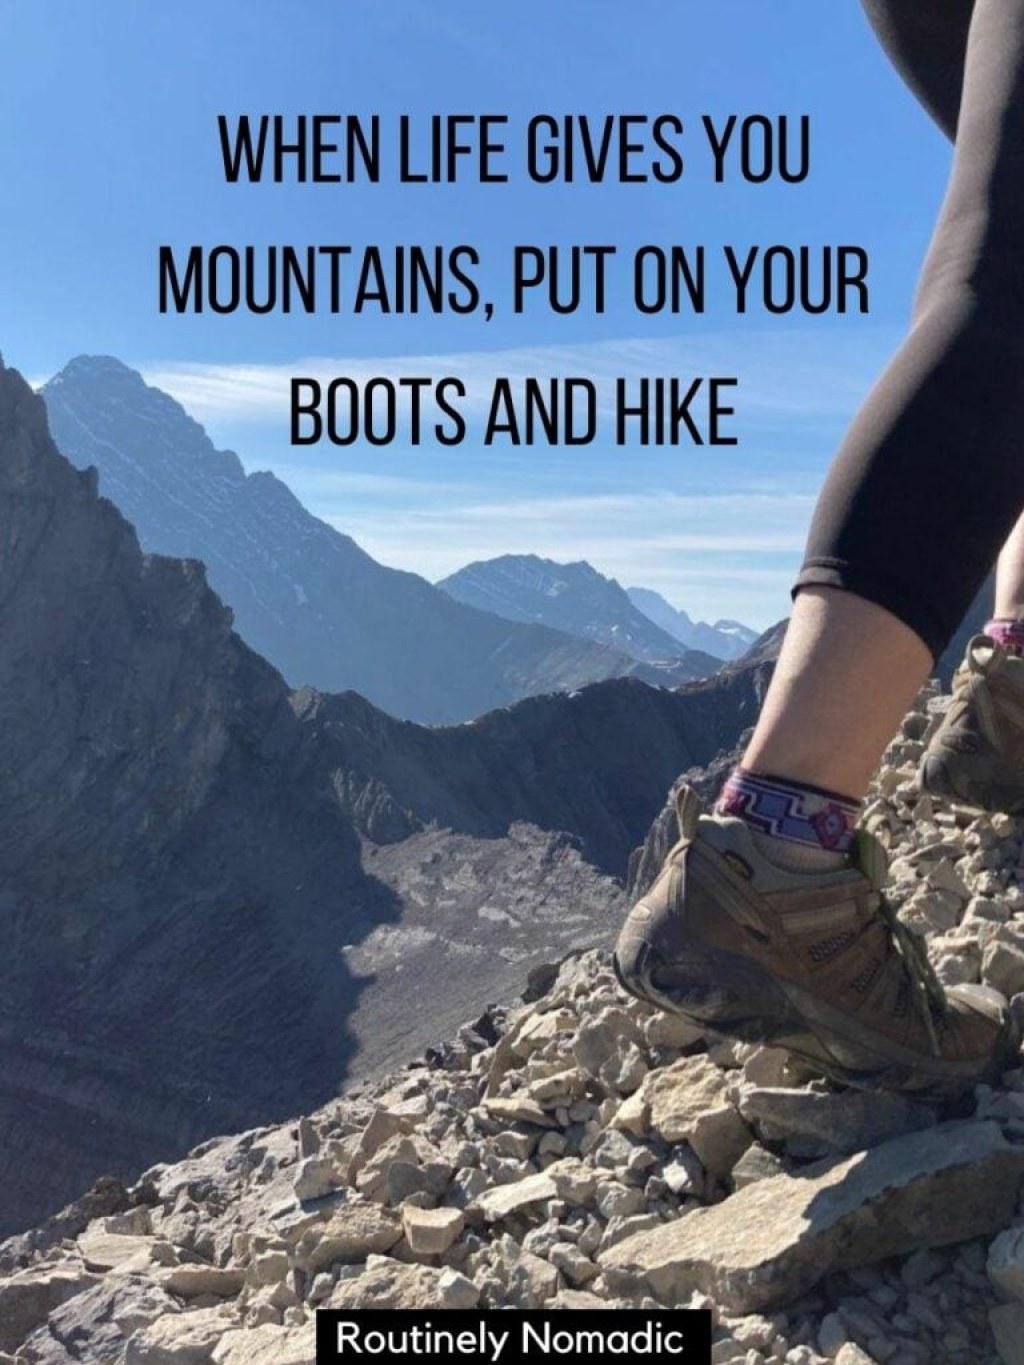 hiking gear quotes - Hiking Quotes: + Amazing Trail Quotes for   Routinely Nomadic